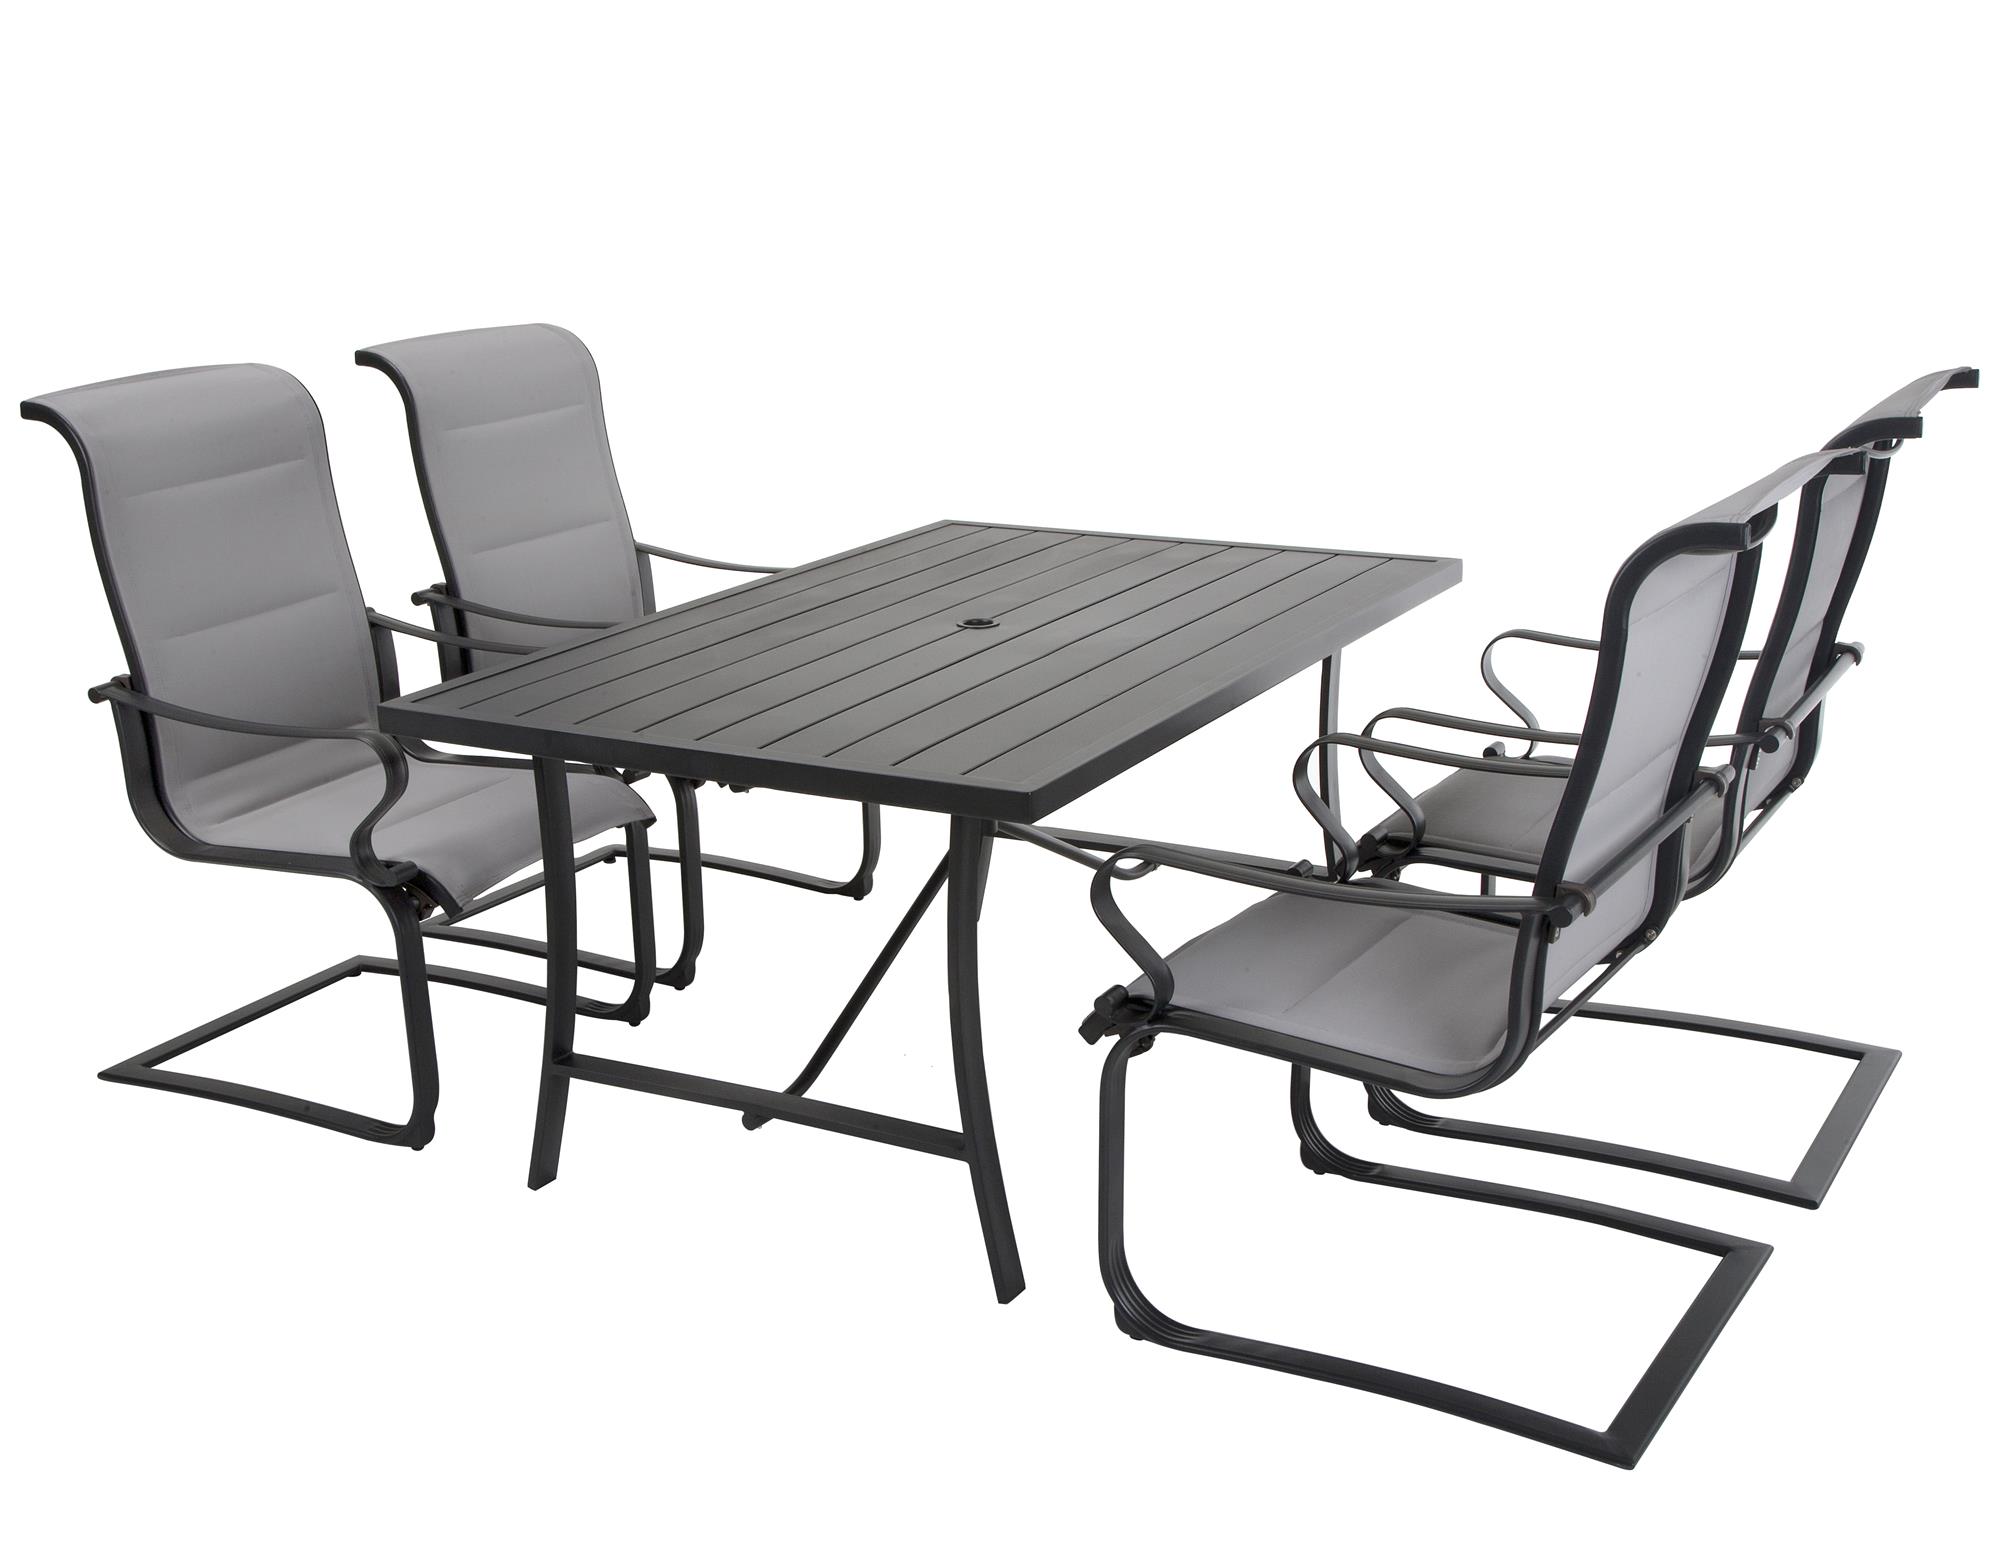 COSCO Outdoor Living 5 Piece SmartConnect Dining Set with Padded Motion Chairs, Gray Frame, Gray Fabric - image 5 of 23